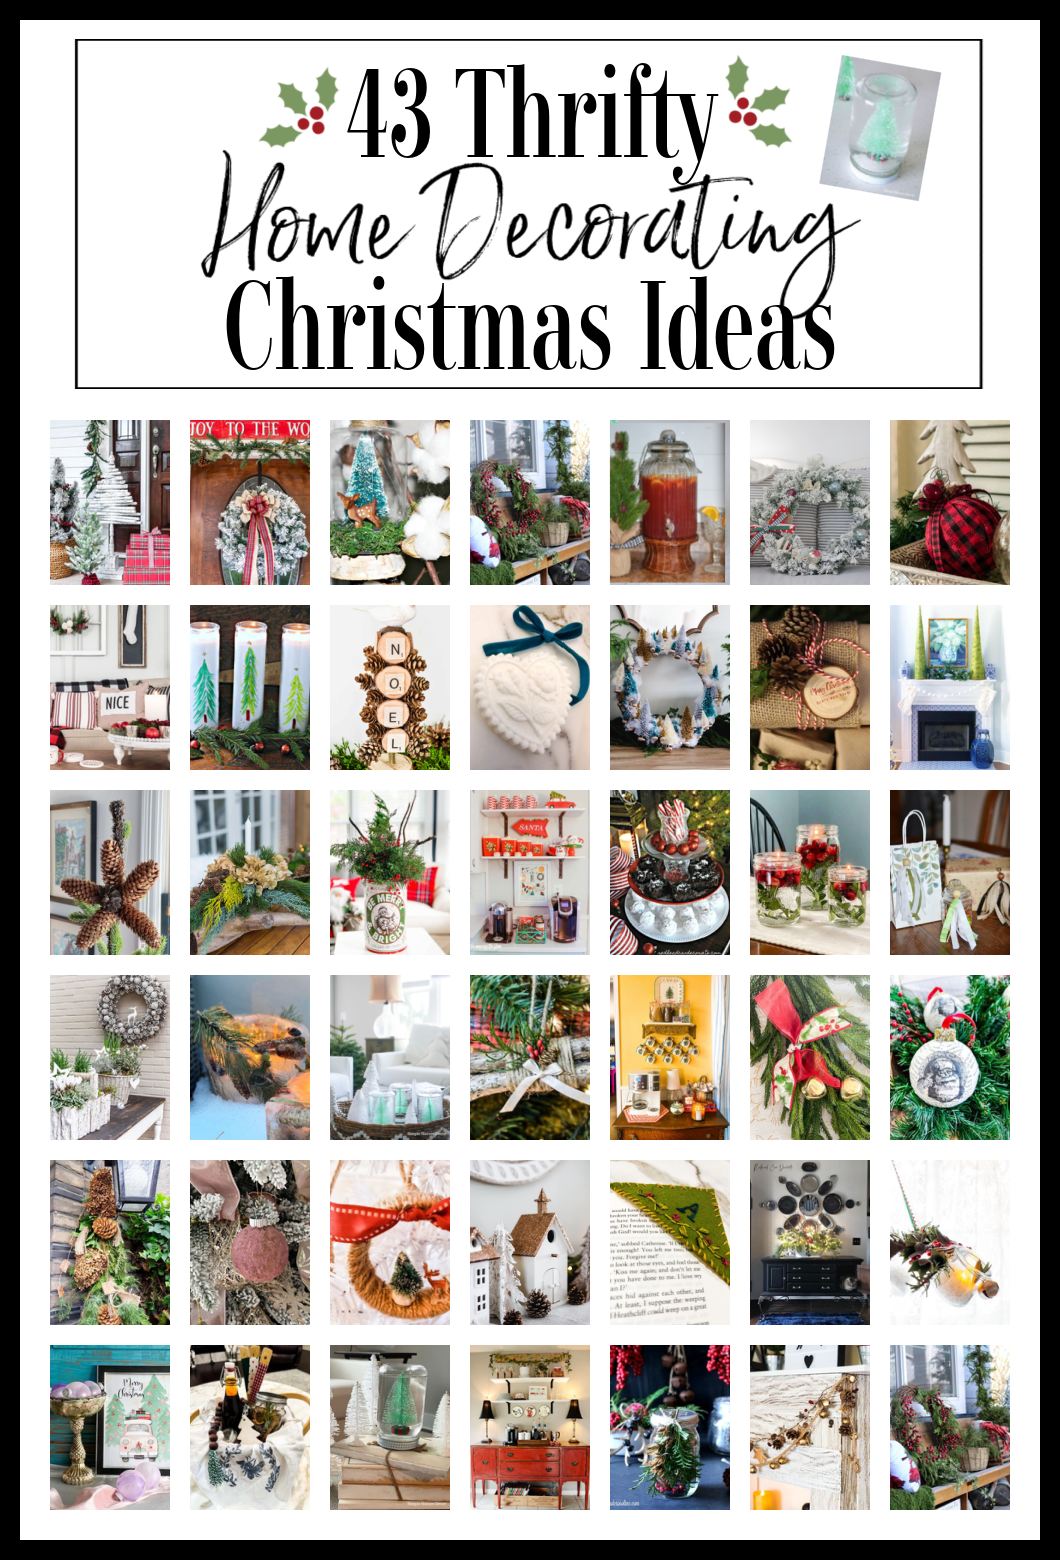 thrifty home decorating Christmas ideas pin collage